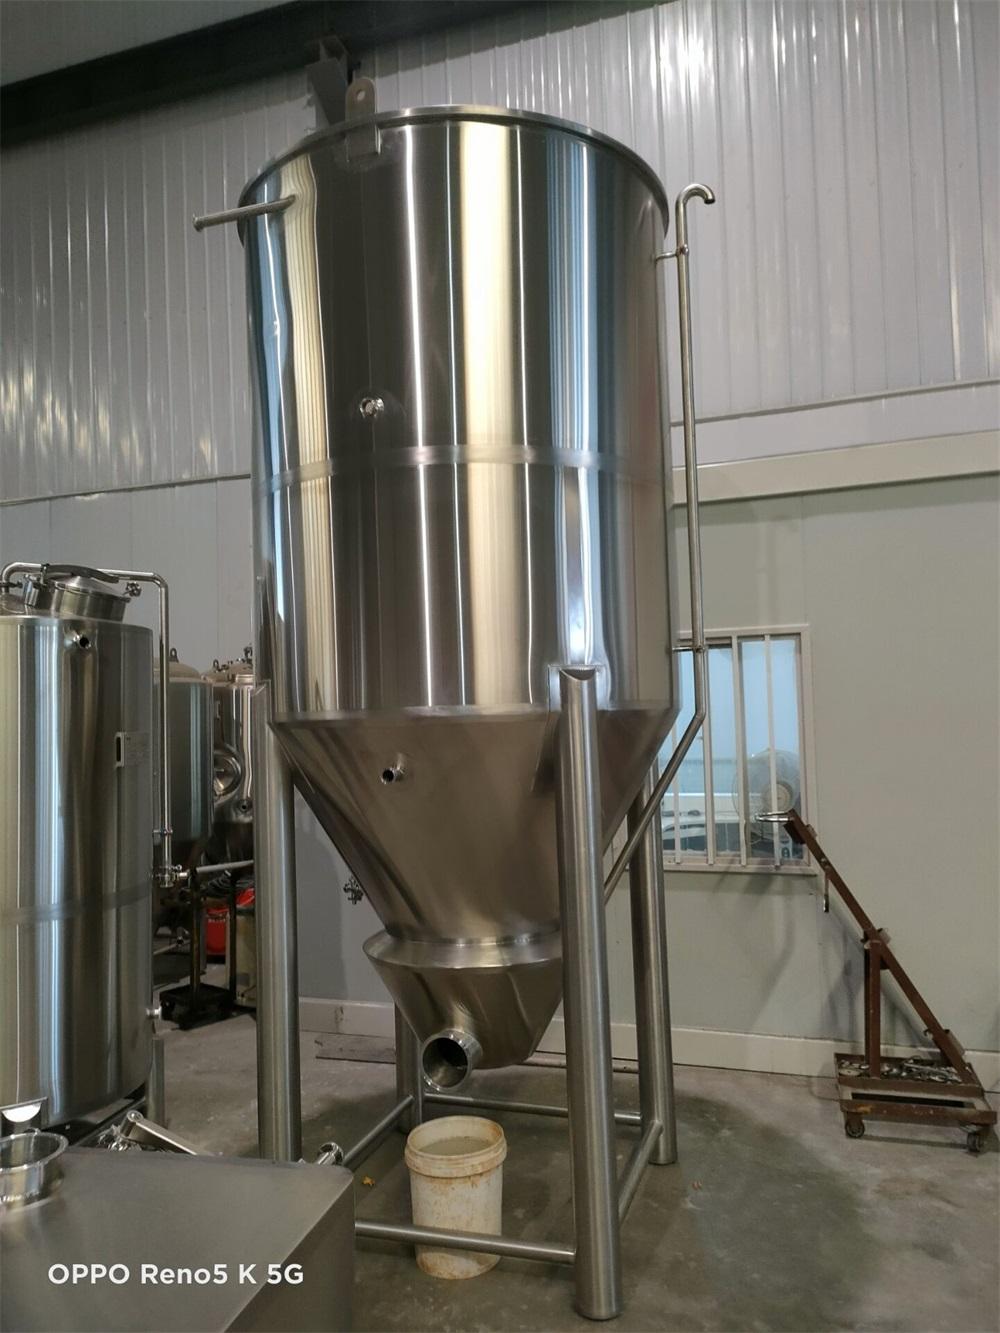 TIANTAI 1500L brewhouse, distillery system, whisky distill, mashing system, wash fermenter, mash/lauter tun, Tiantai beer equipment, beer beverage projects